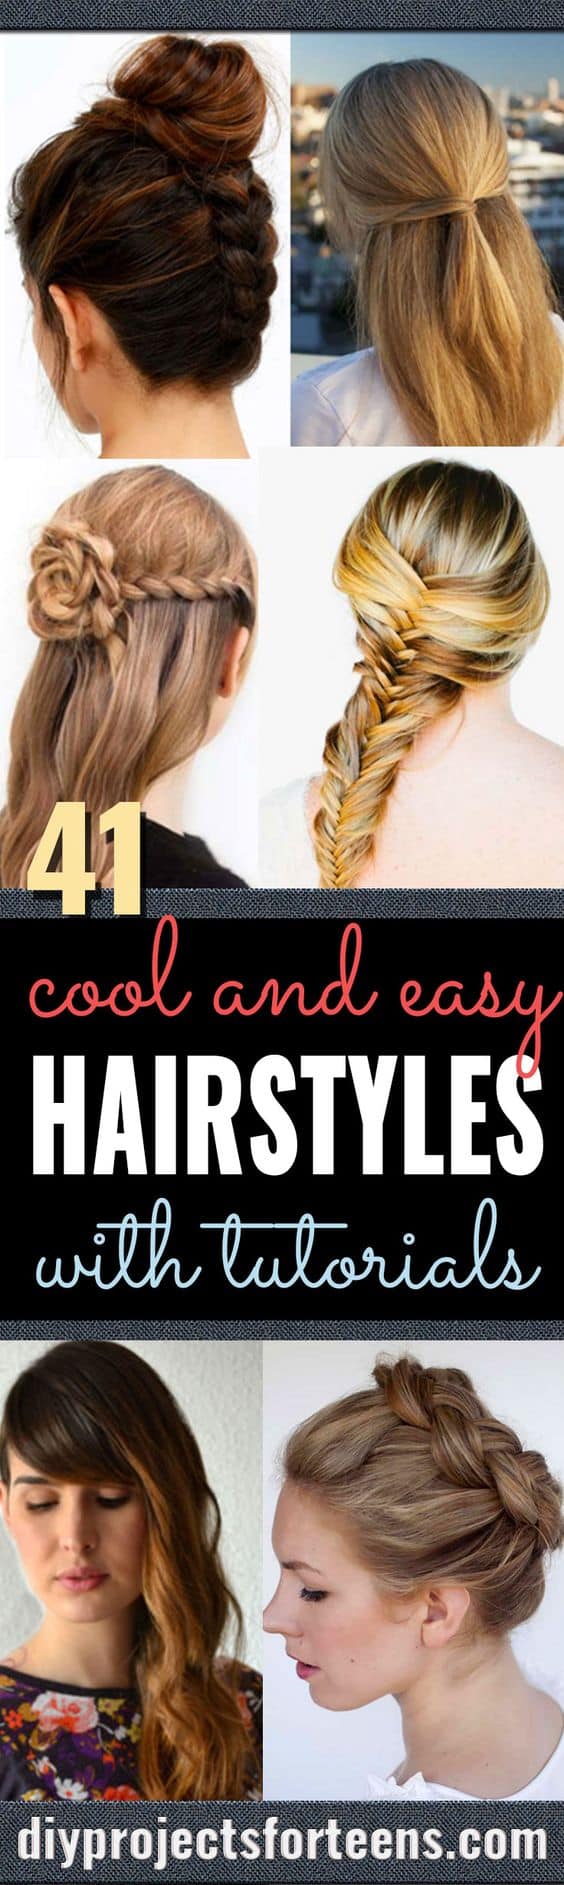 Easy Hairstyles For Long Hair To Do At Home - So Simple Ideas